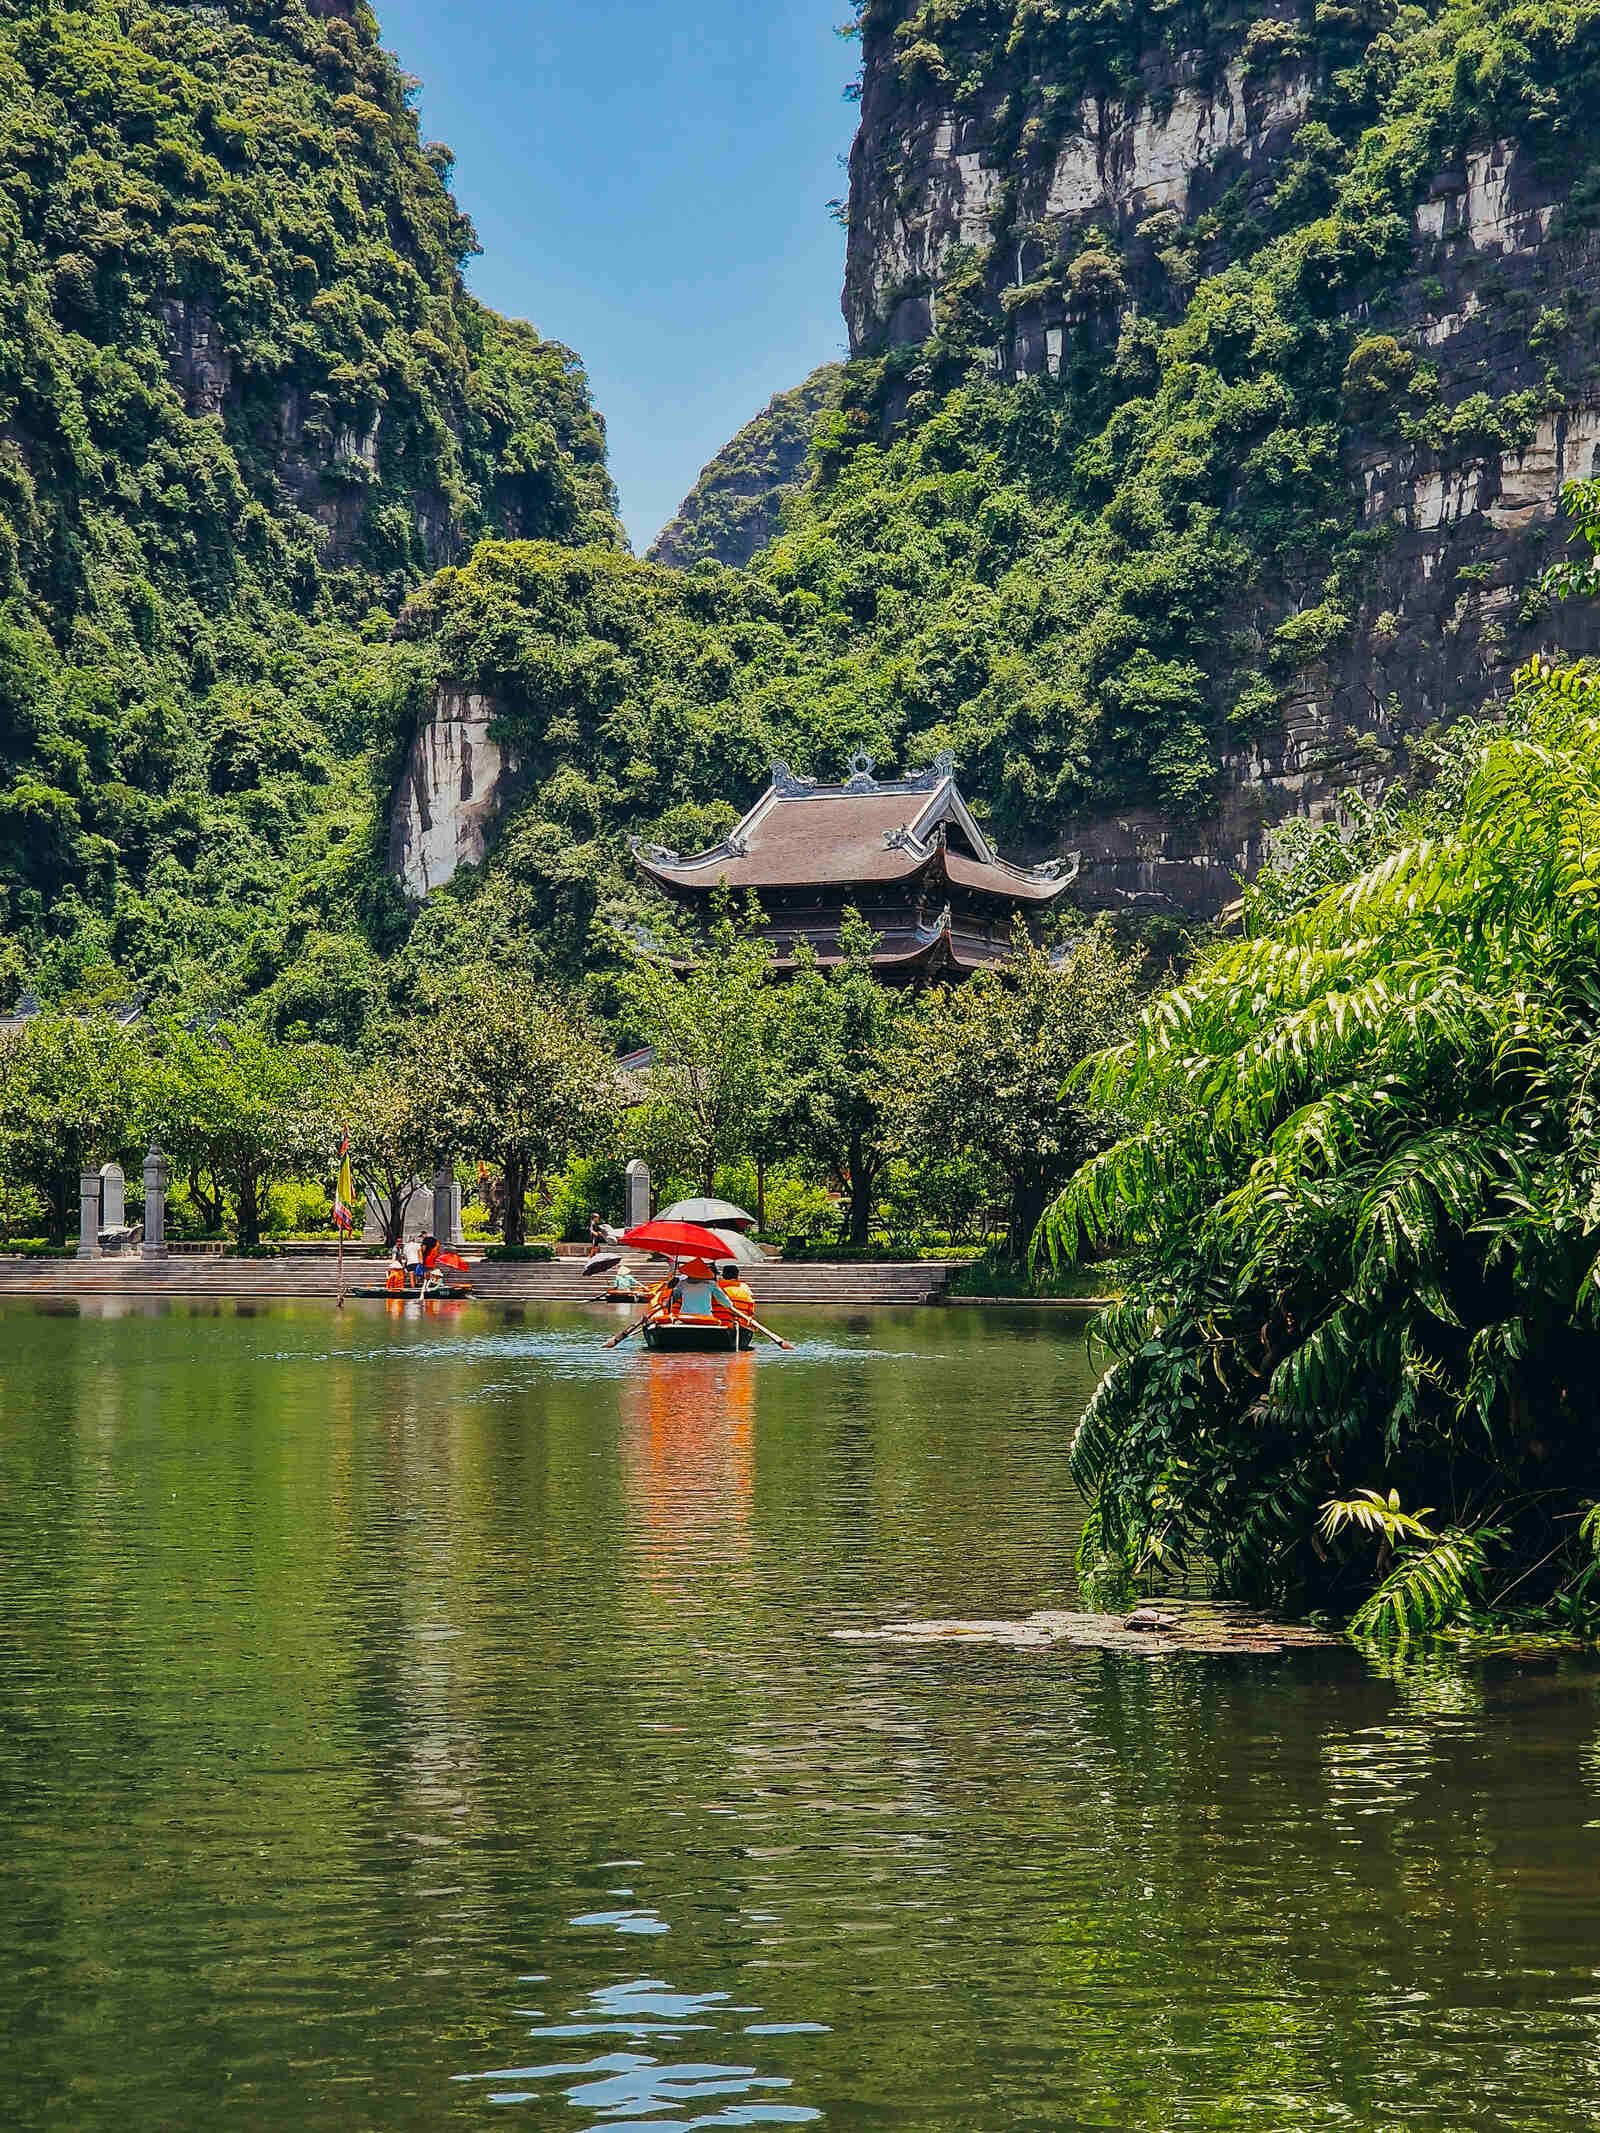 small rowing boats cruising down a waterway surrounded by green cliffs